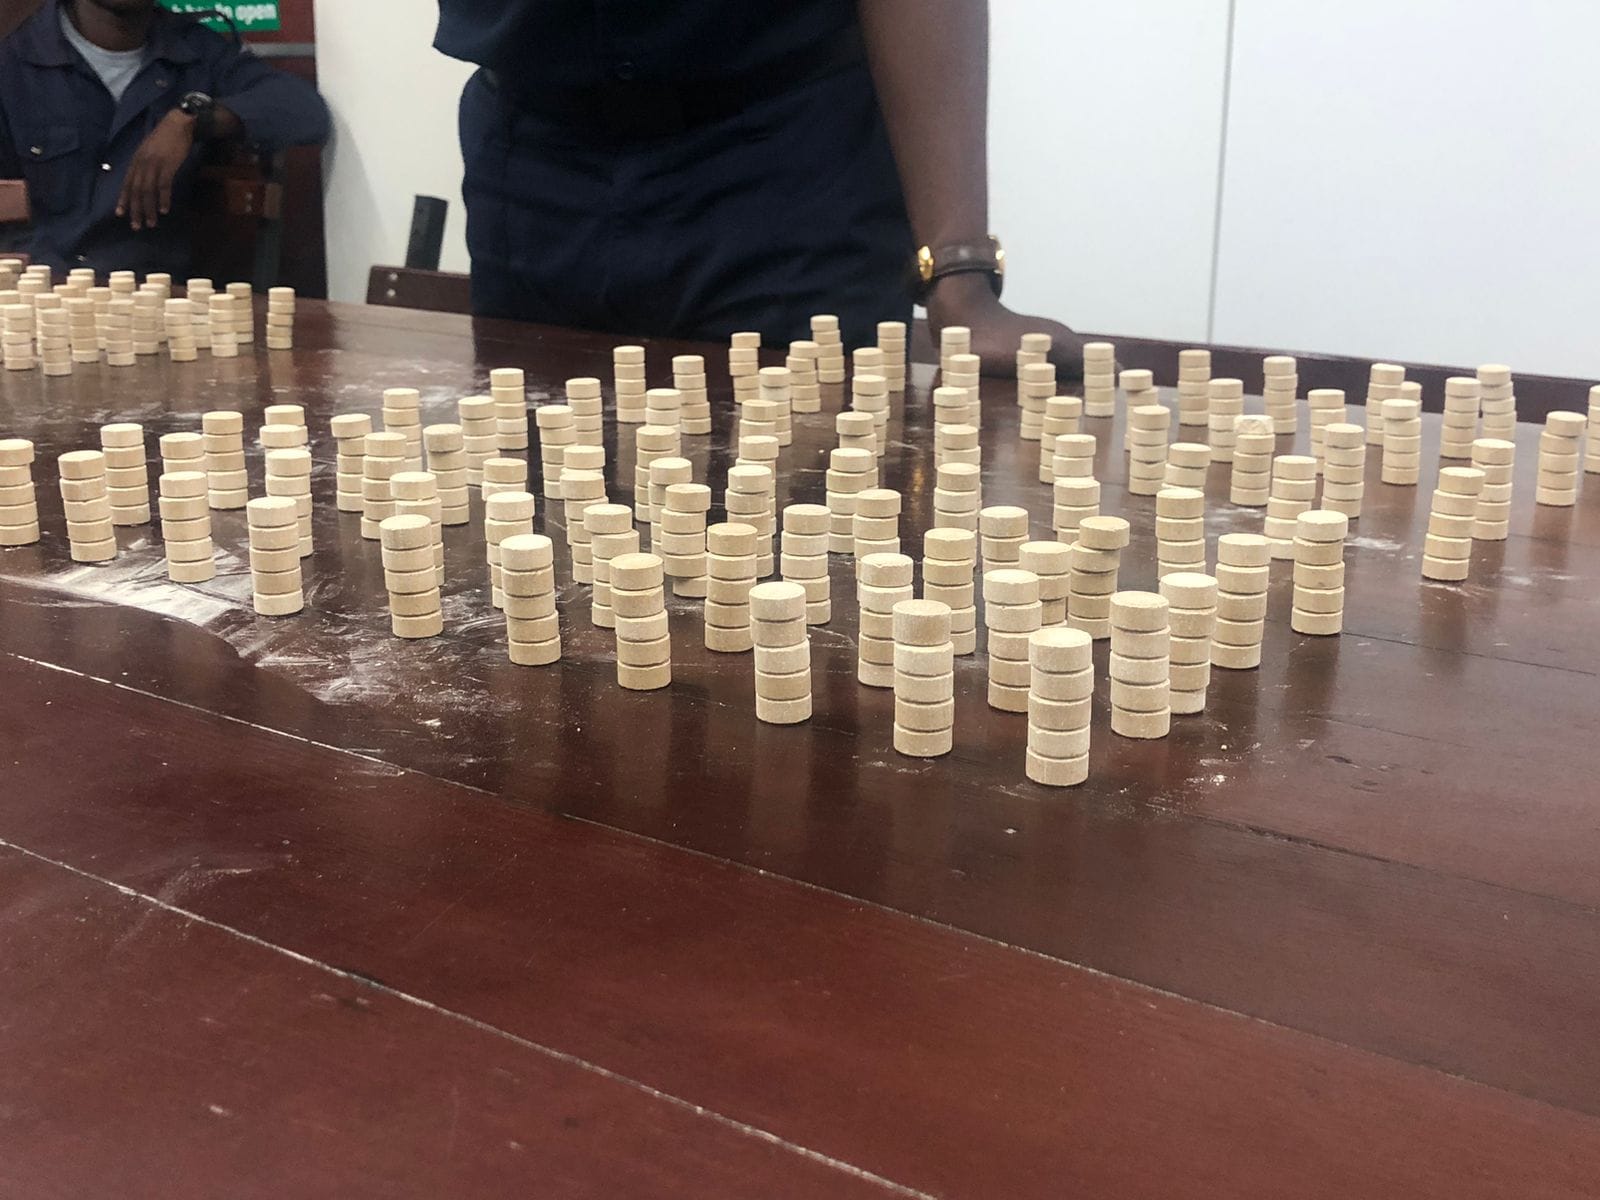 Police in Gqeberha confiscate mandrax tablets